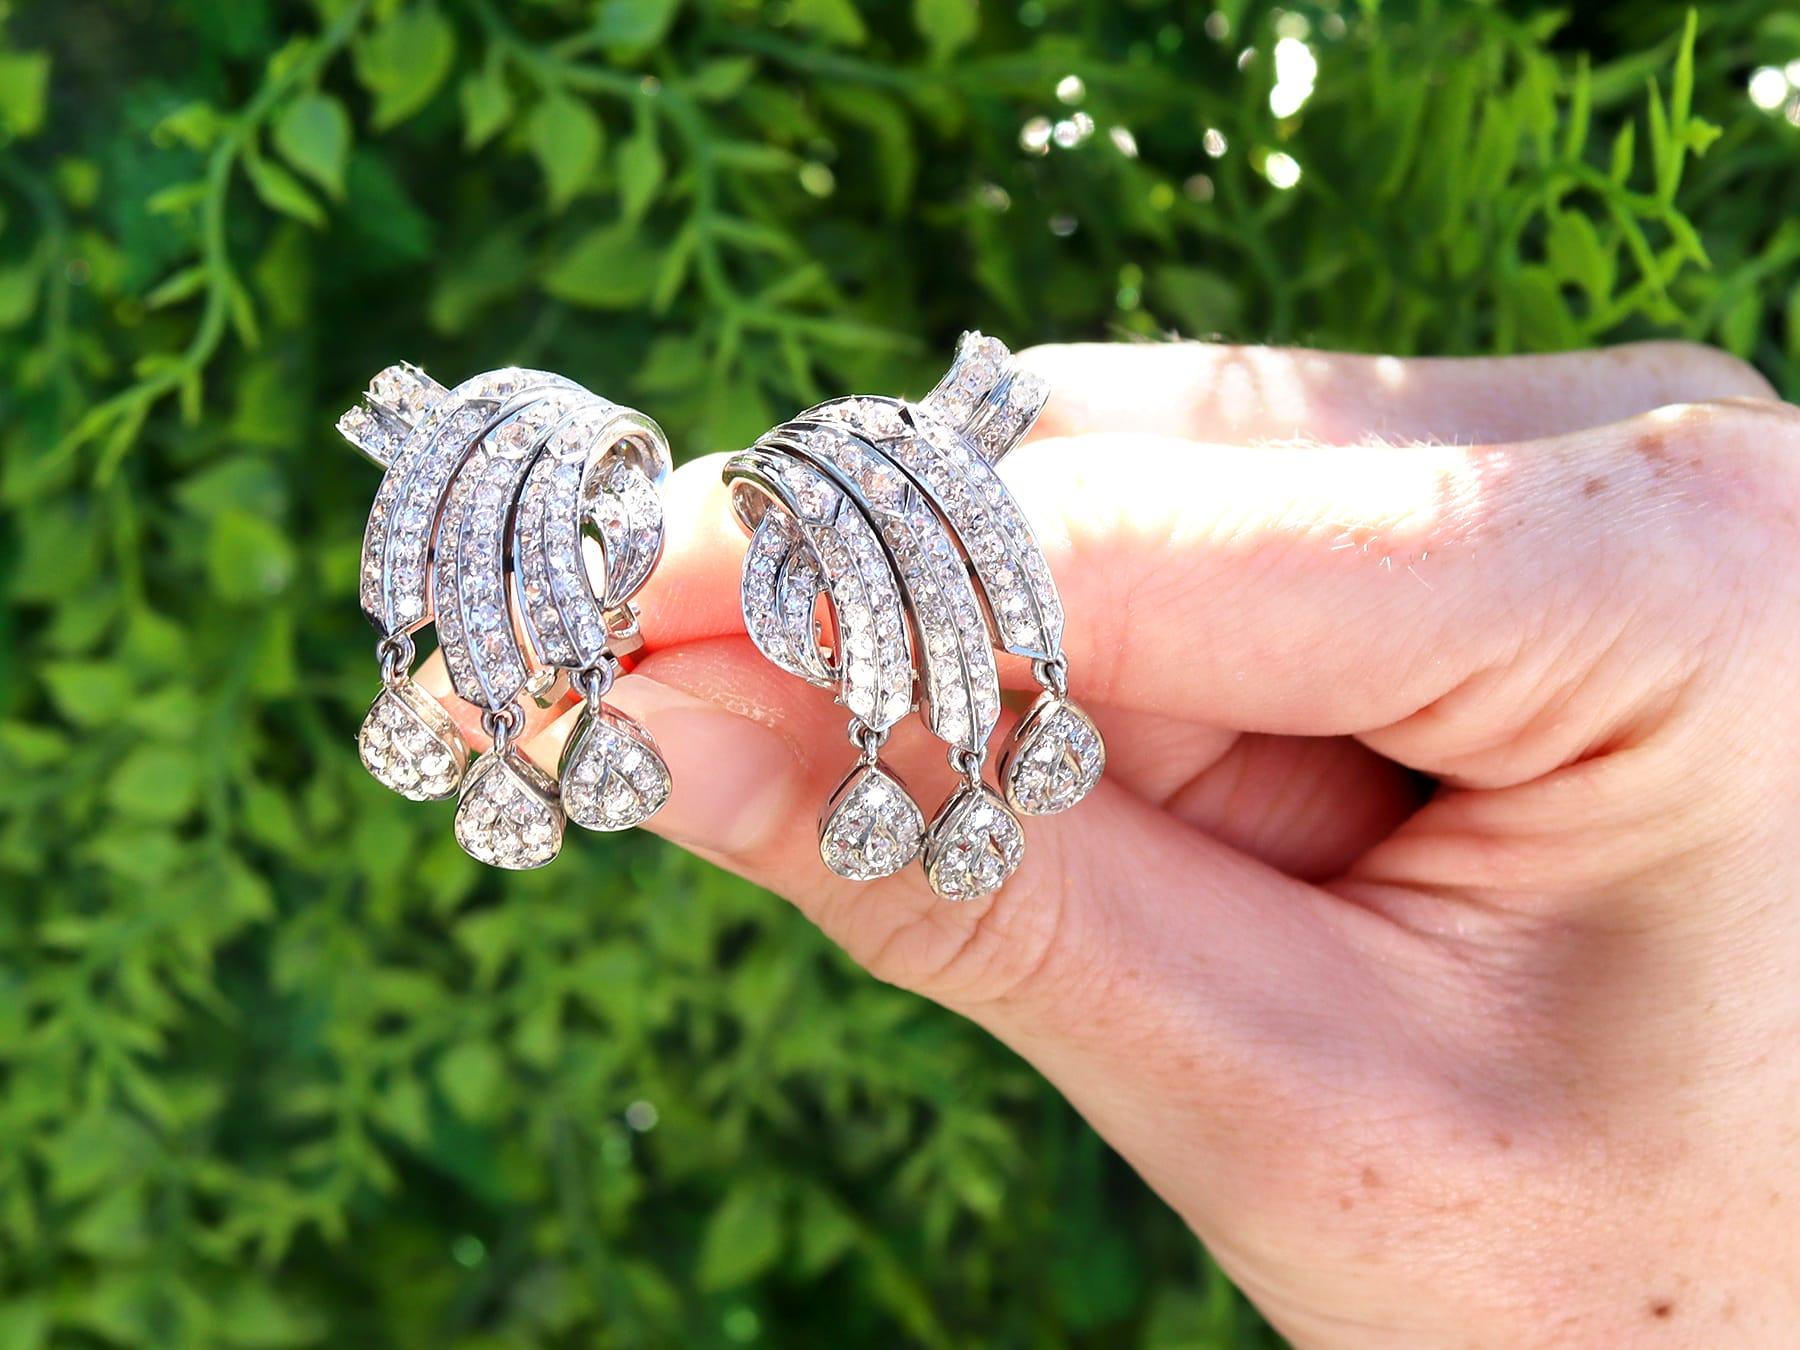 A stunning, fine and impressive pair of antique 4.26 carat diamond and platinum drop earrings; part of our diamond jewellery collections

These excellent drop earrings have been crafted in platinum.

Each opposing earring has an asymmetric